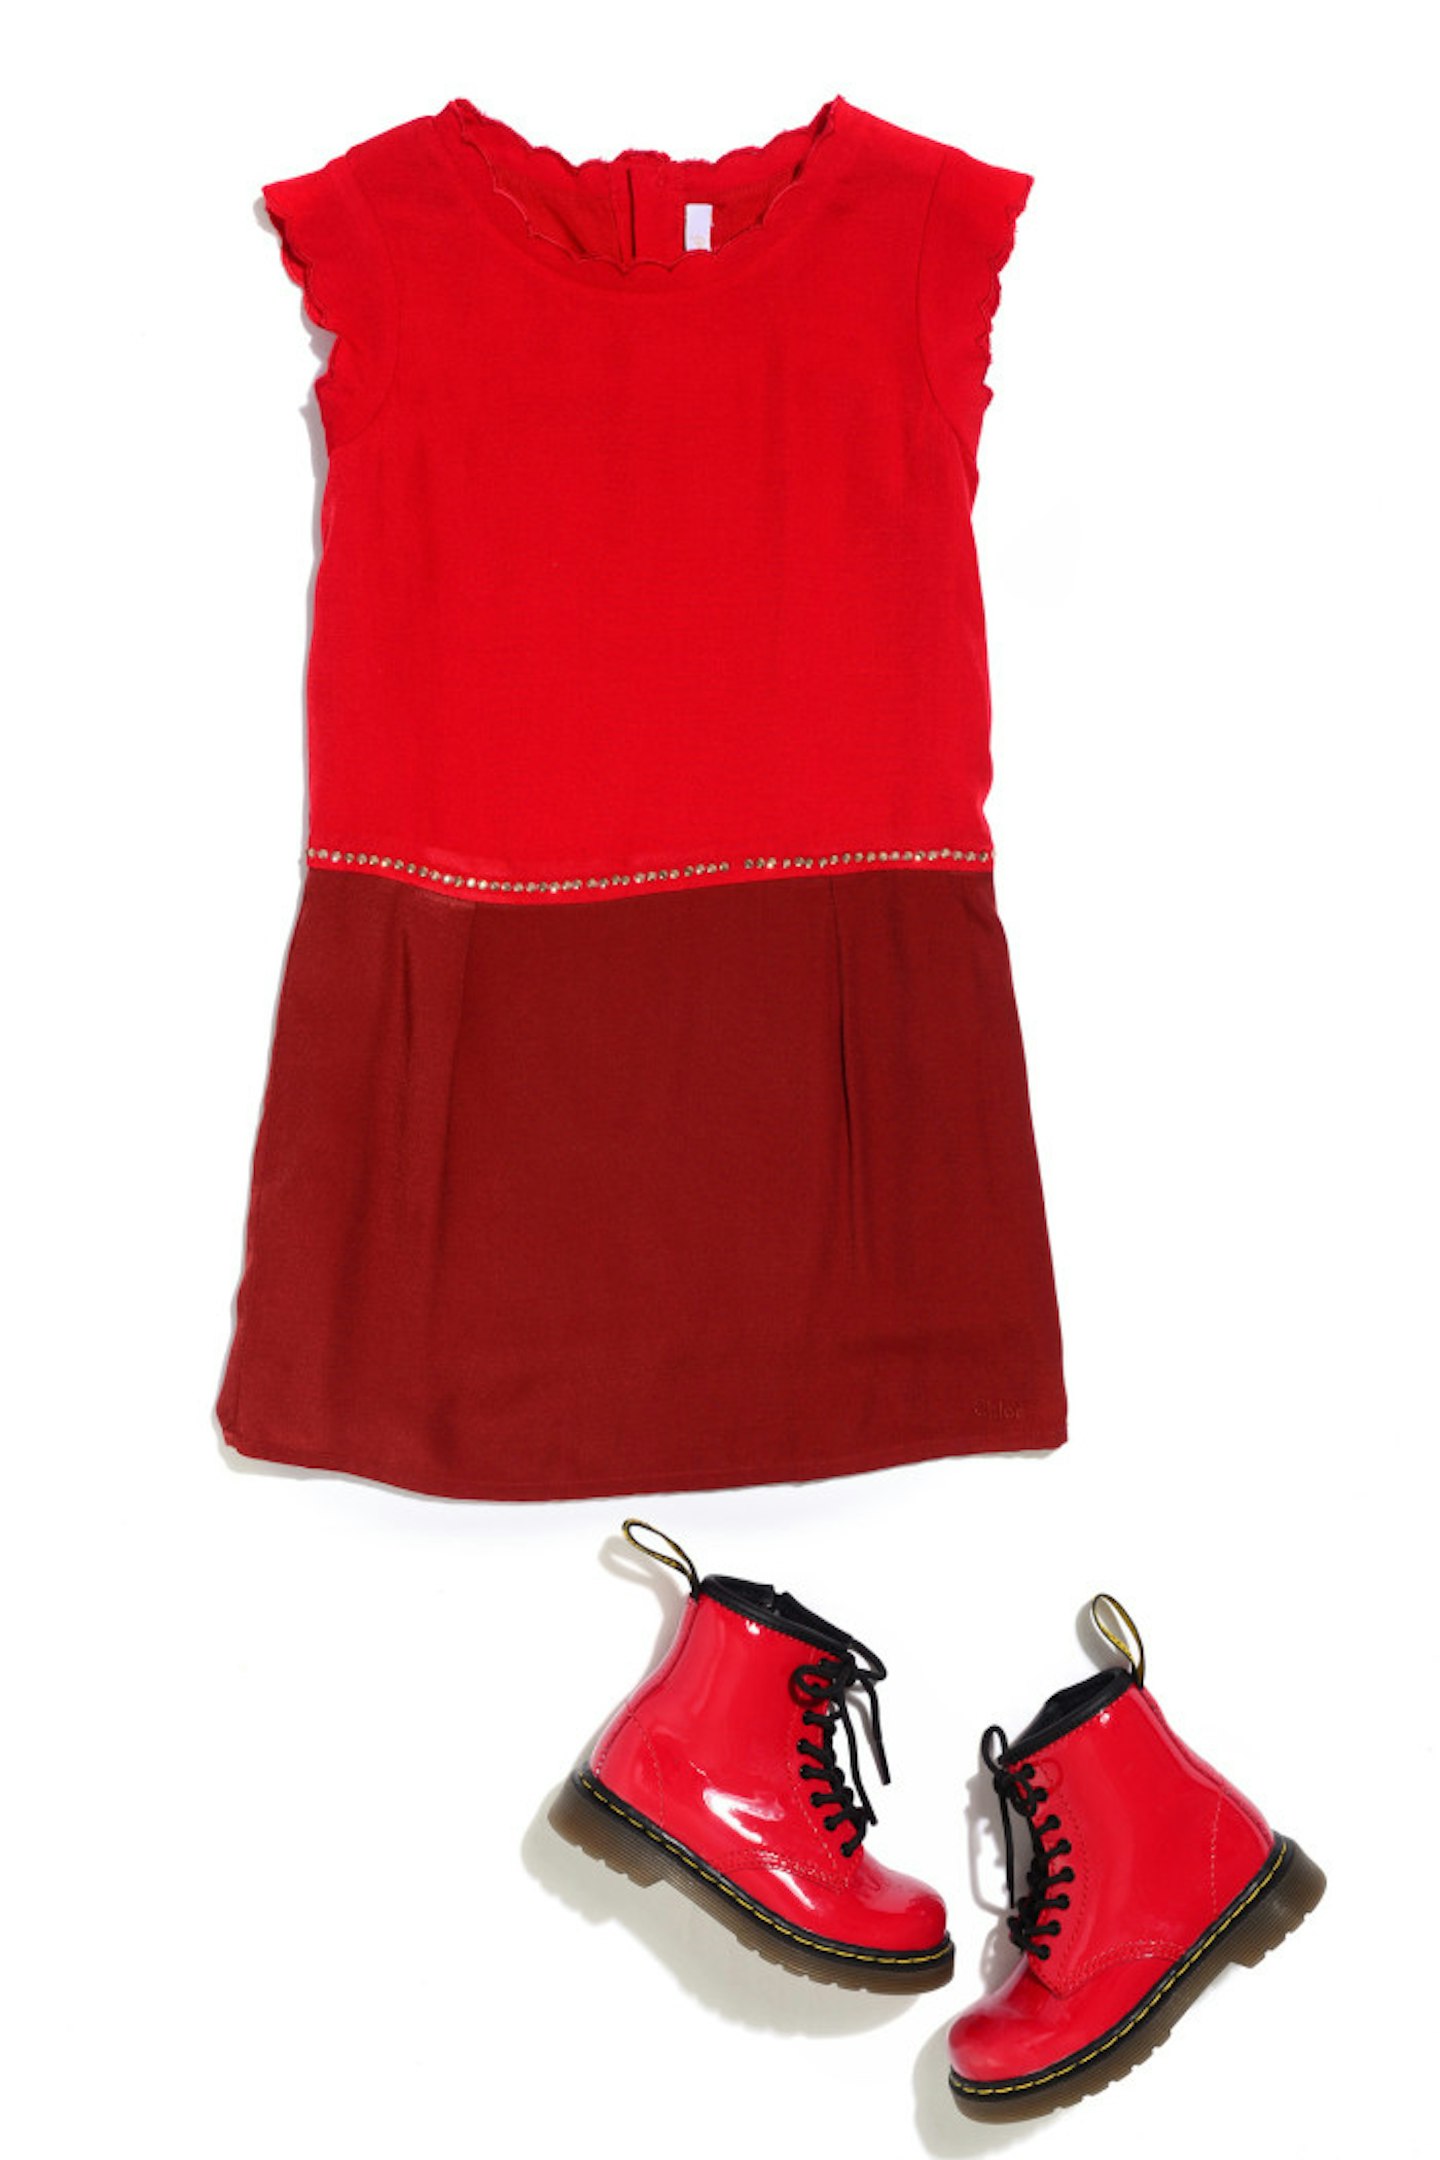 Chloe red sequin dress and Red Doc Martens